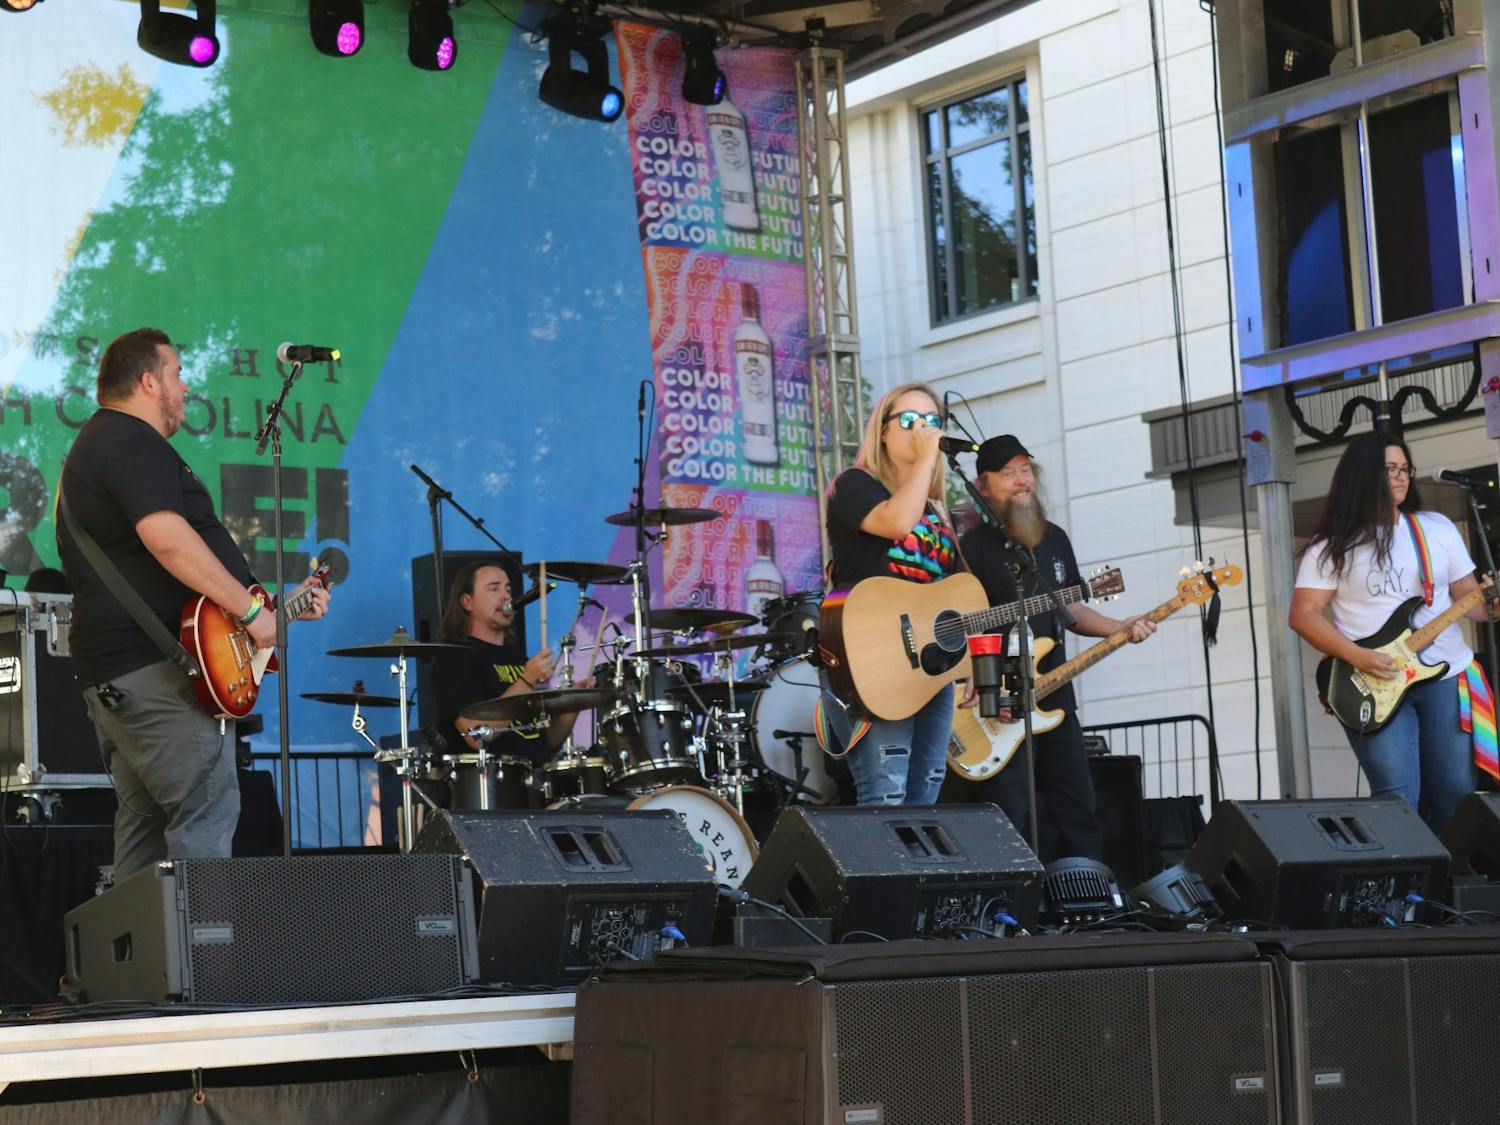 Performers take the main stage at the 2021 South Carolina Pride Festival, an event dedicated to celebrating the LGBTQIA+ community and advocating for LGBTQIA+ equality.